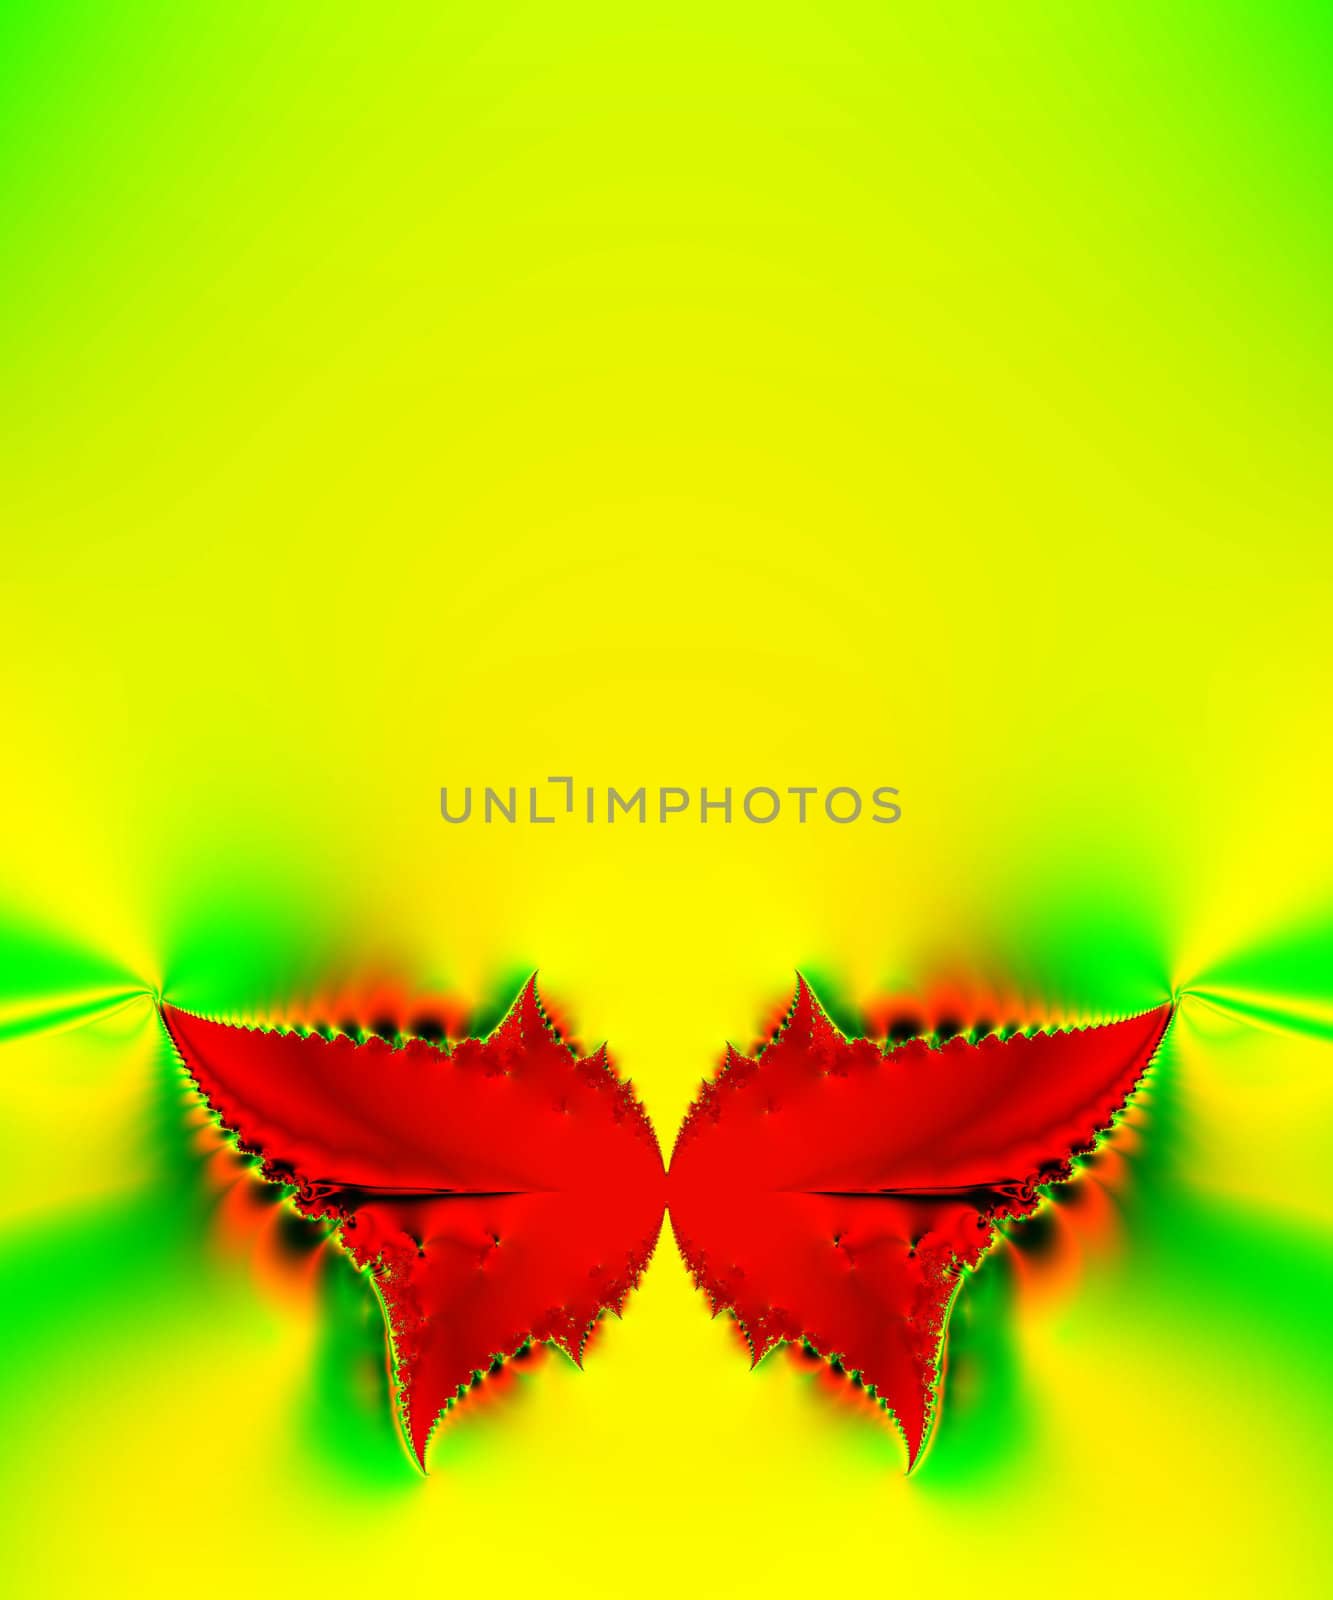 abstract red butterfly over bright yellow and green background, enough copy space for your text, invitation, announcement